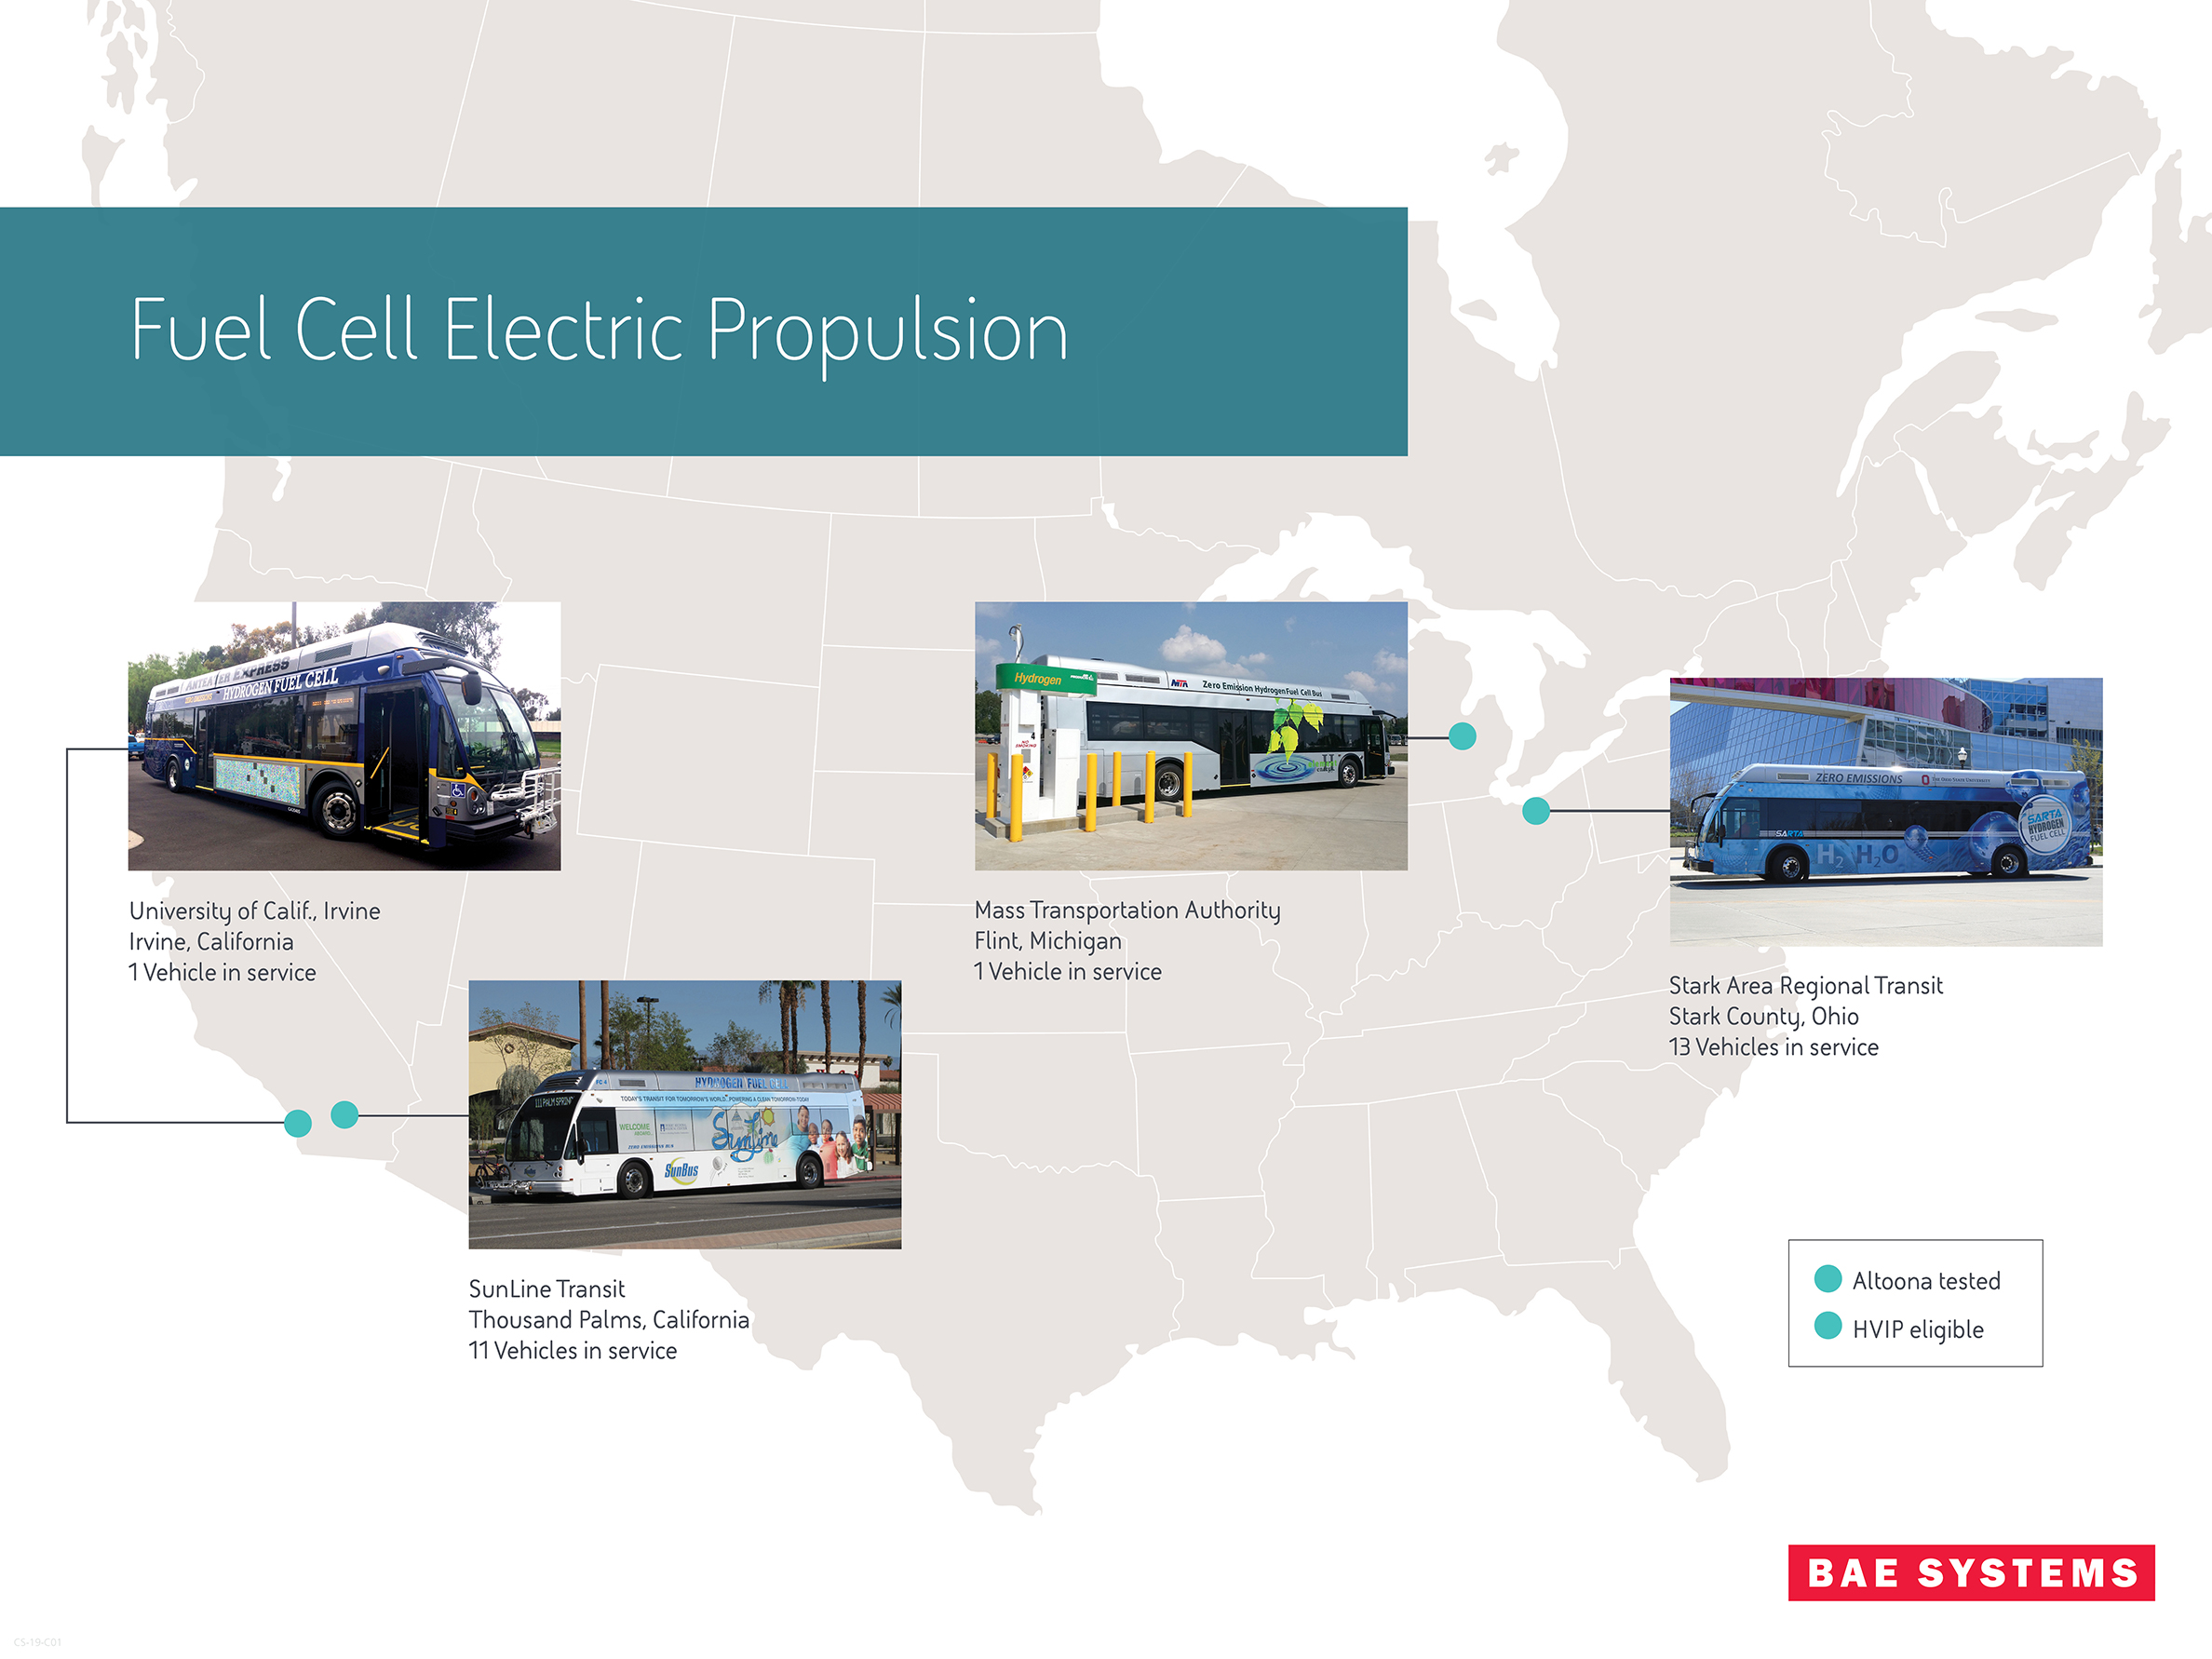 Fuel Cell locations